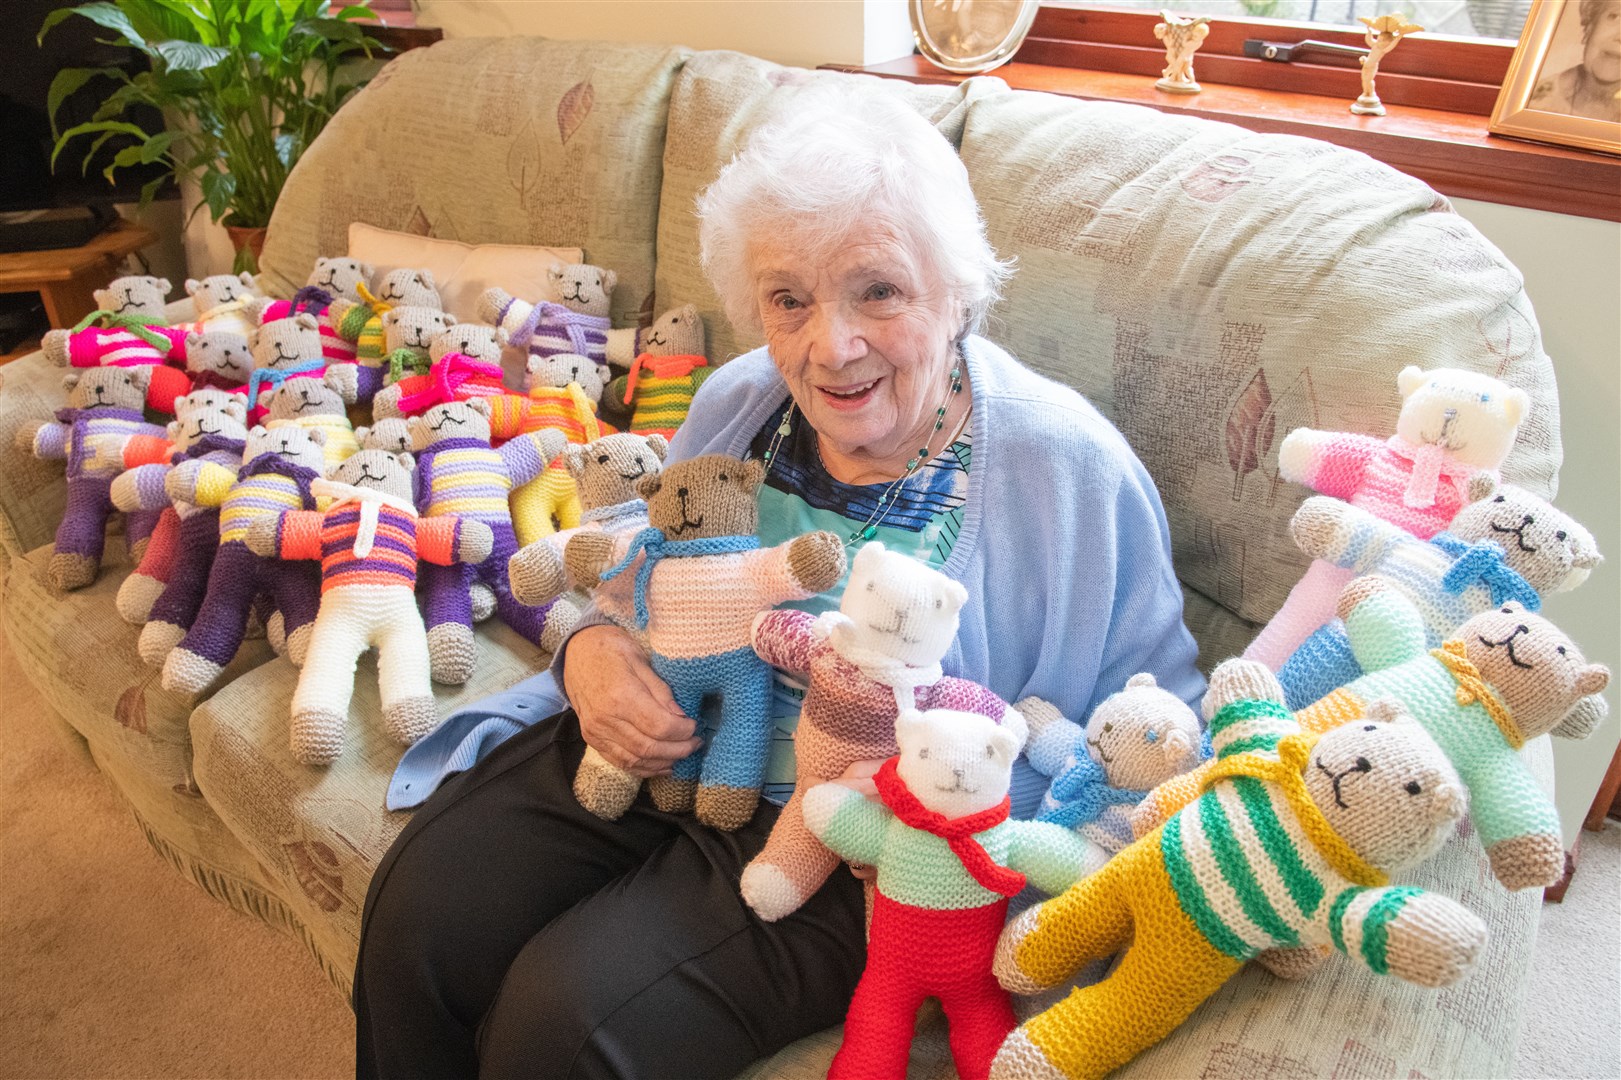 87-year-old Joyce Wilson has knitted over 400 bears for charity - despite having arthritis in her hands. Picture: Daniel Forsyth